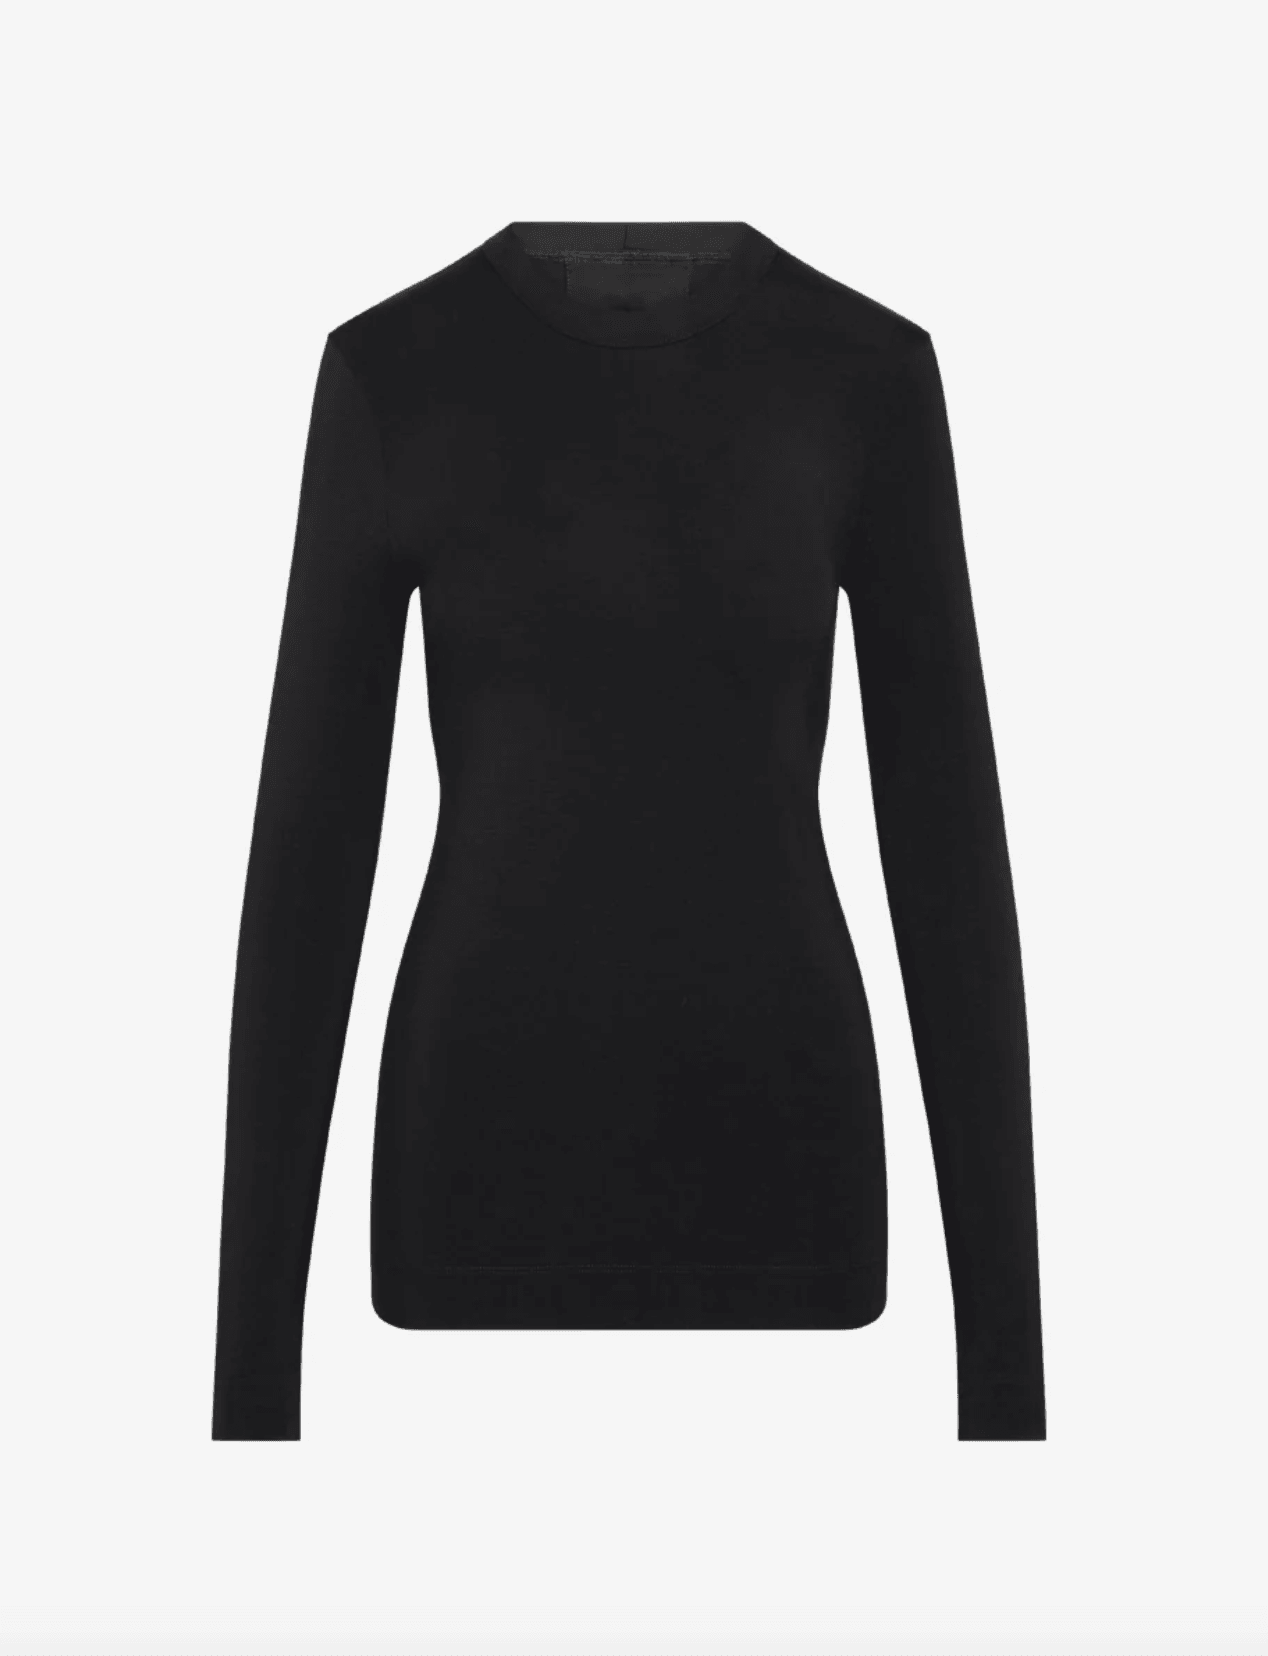 Commando - Butter Long Sleeved Black Top - 32 The Guild 